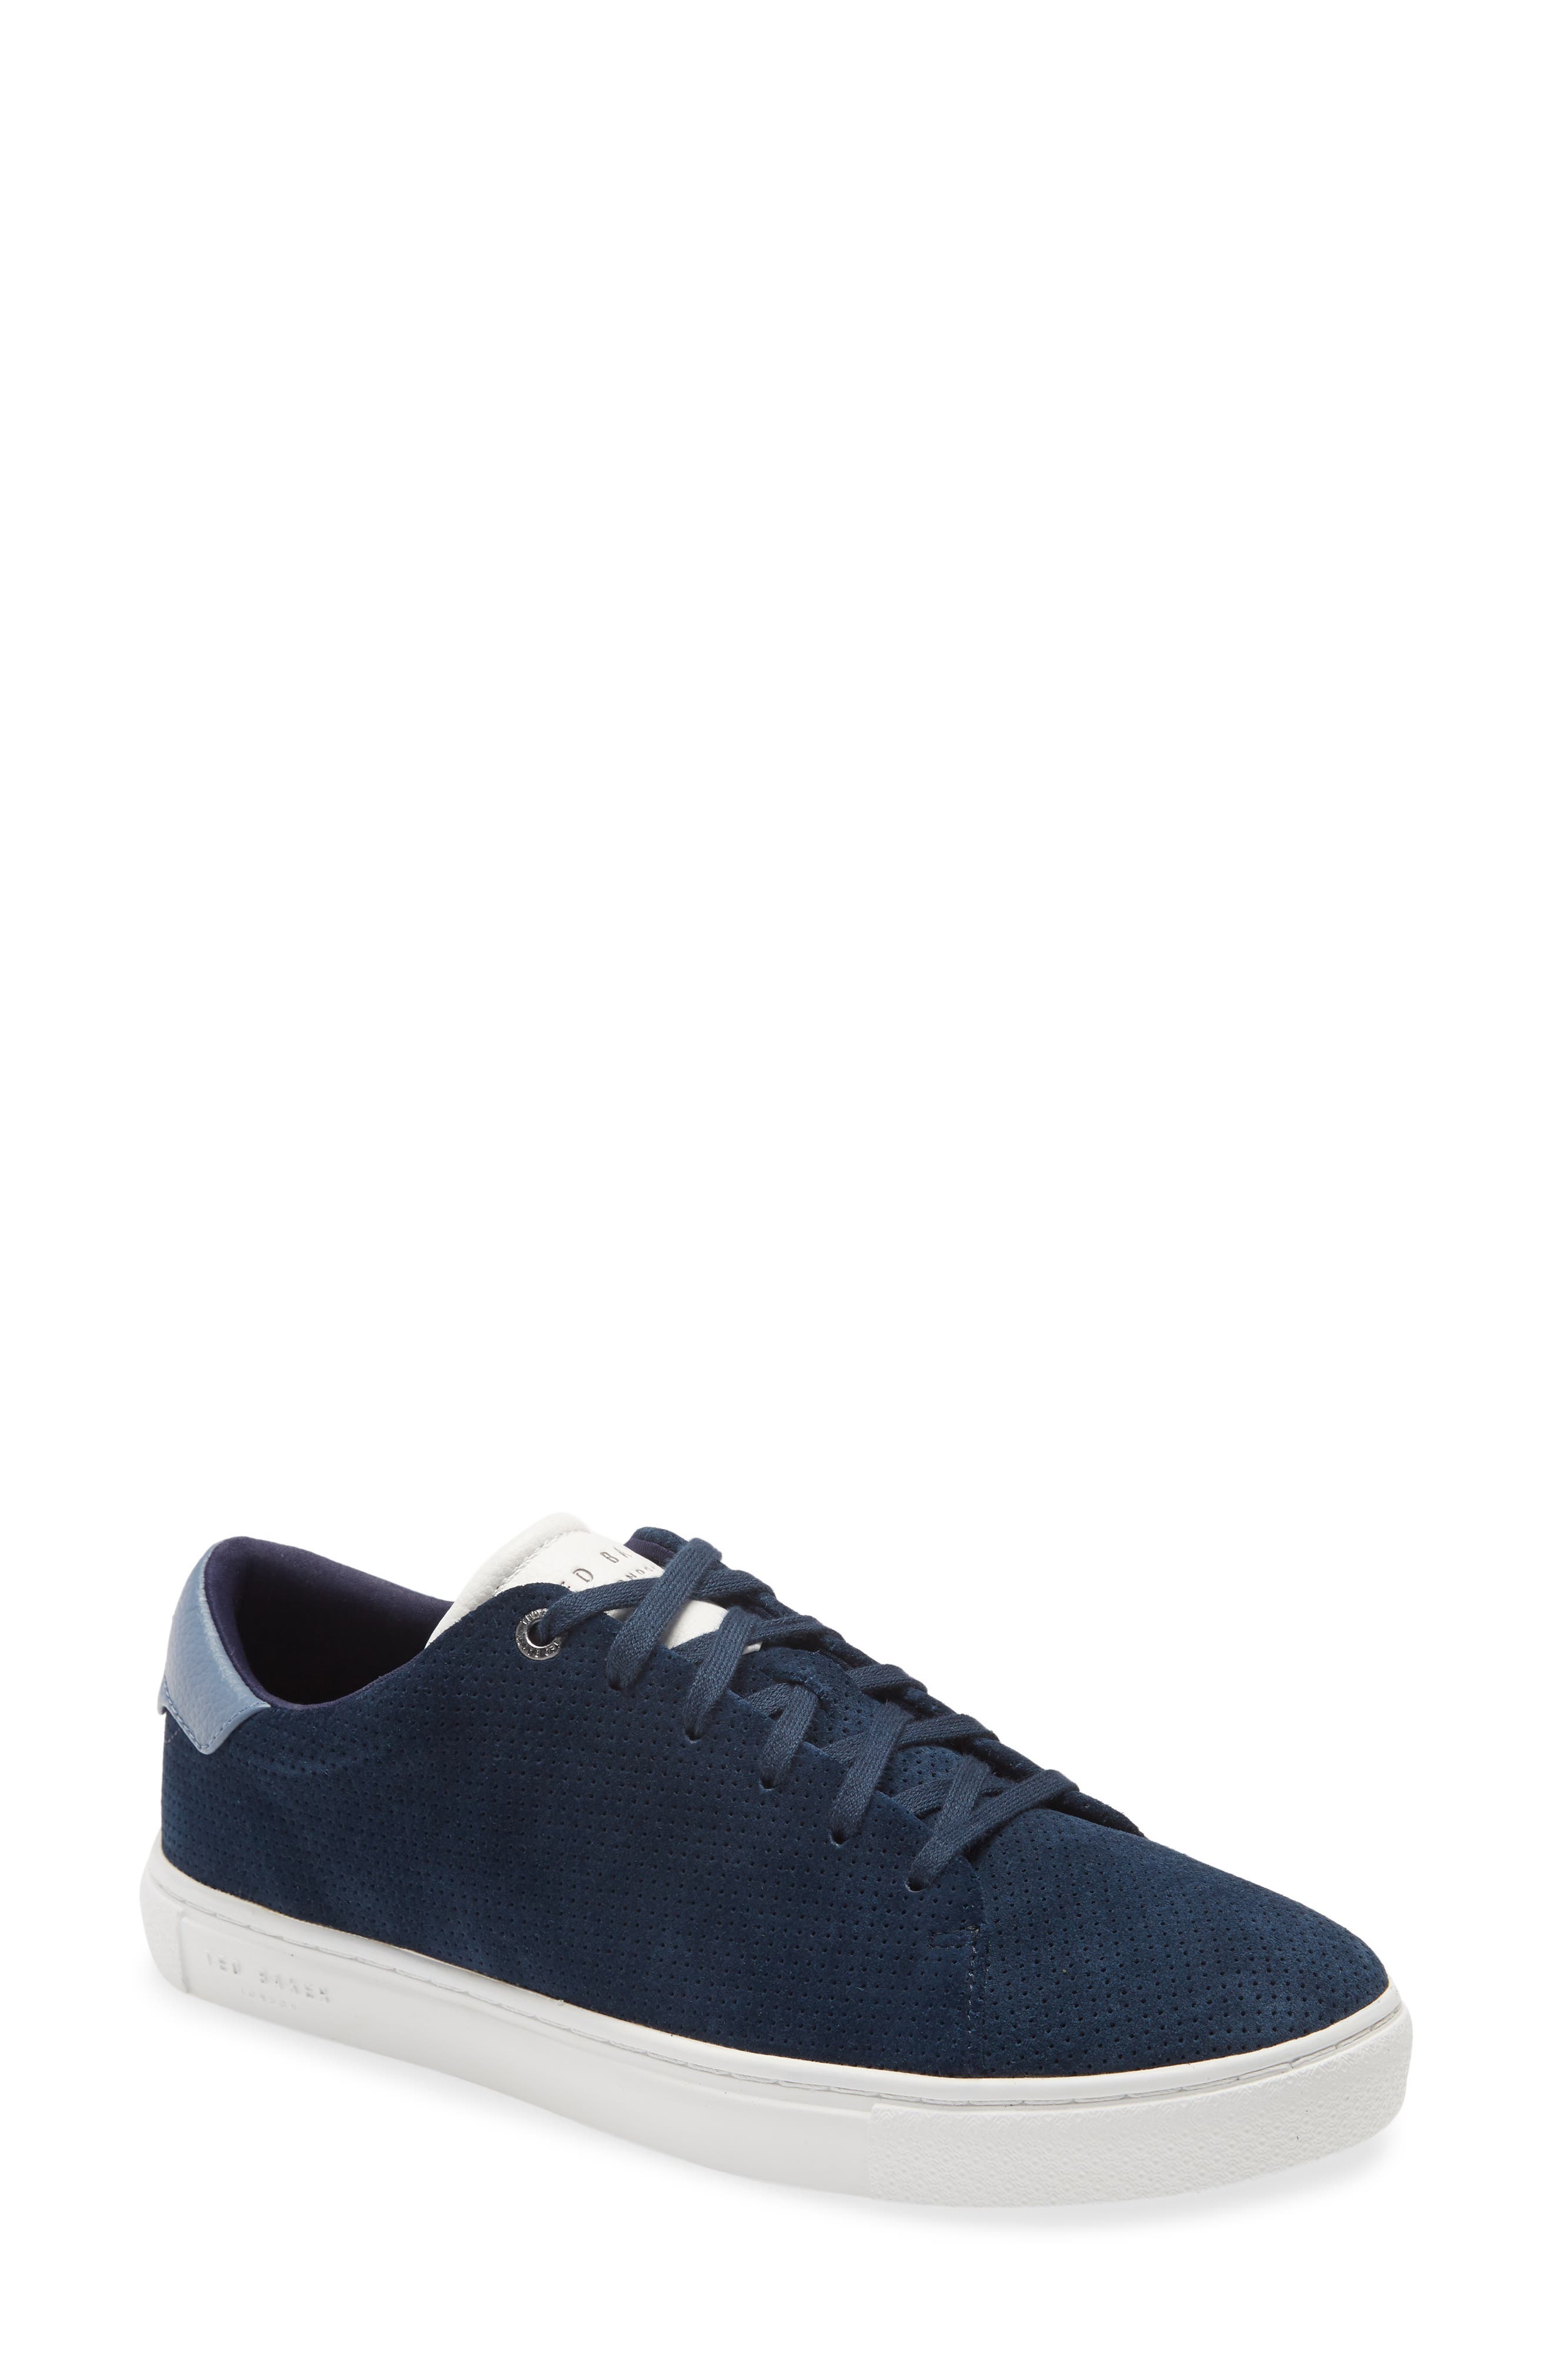 ted baker shoes mens price